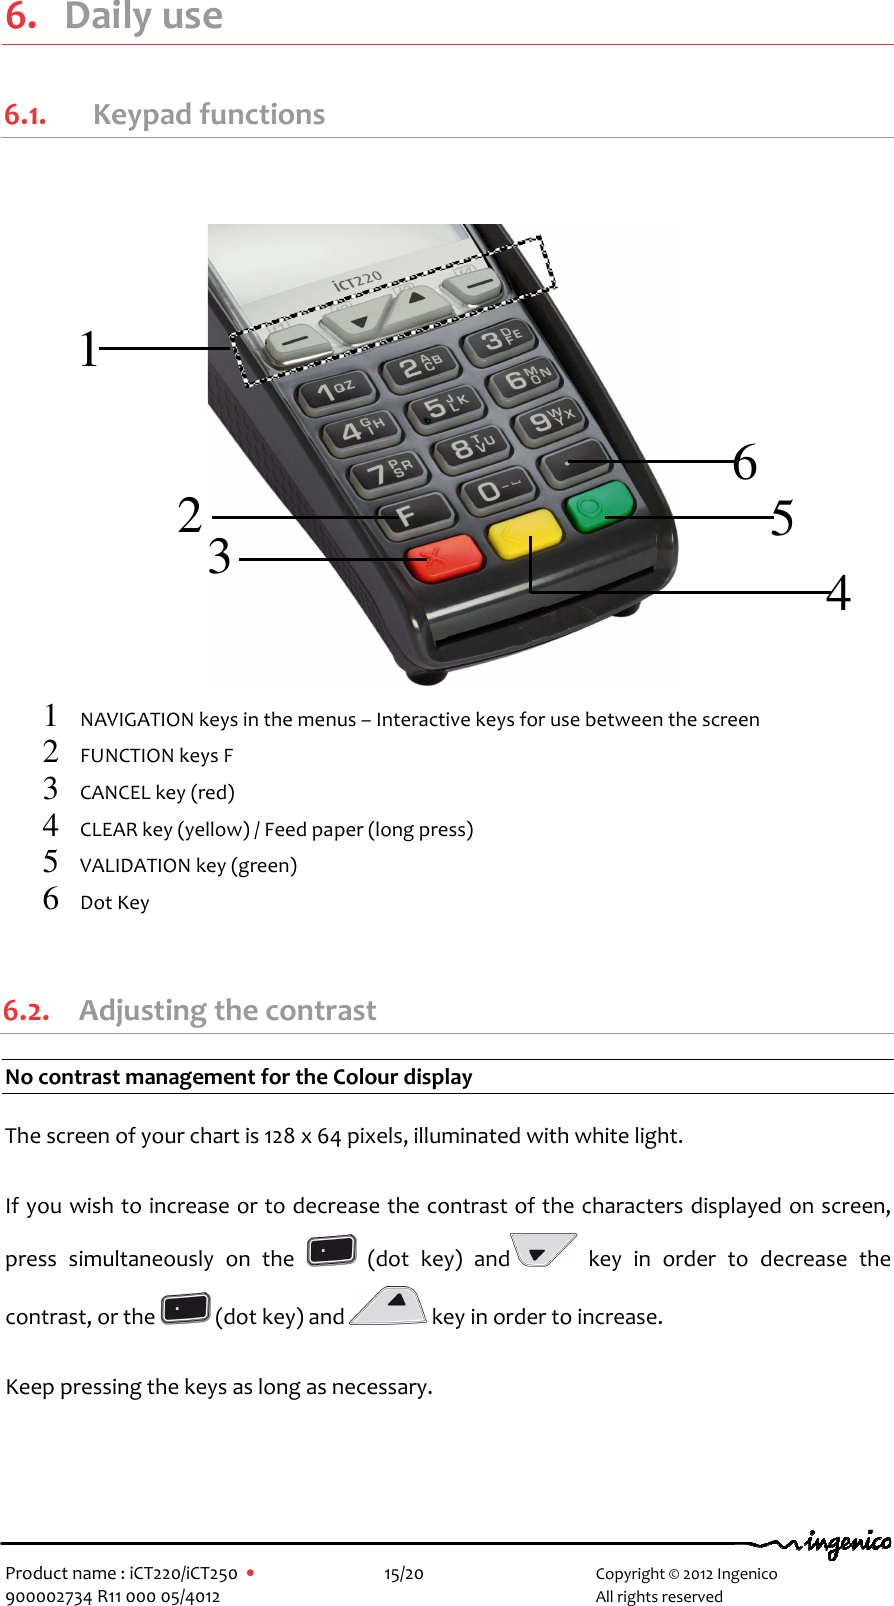   Product name : iCT220/iCT250  •    15/20       Copyright © 2012 Ingenico 900002734 R11 000 05/4012       All rights reserved  6. Daily use 6.1.   Keypad functions                    1 NAVIGATION keys in the menus – Interactive keys for use between the screen   2 FUNCTION keys F 3 CANCEL key (red) 4 CLEAR key (yellow) / Feed paper (long press) 5 VALIDATION key (green) 6 Dot Key   6.2. Adjusting the contrast No contrast management for the Colour display  The screen of your chart is 128 x 64 pixels, illuminated with white light.  If you wish to increase or to decrease the contrast of the characters displayed on screen, press  simultaneously  on  the    (dot  key)  and   key  in  order  to  decrease  the contrast, or the   (dot key) and   key in order to increase.  Keep pressing the keys as long as necessary.   1 2 3  4 5 6 